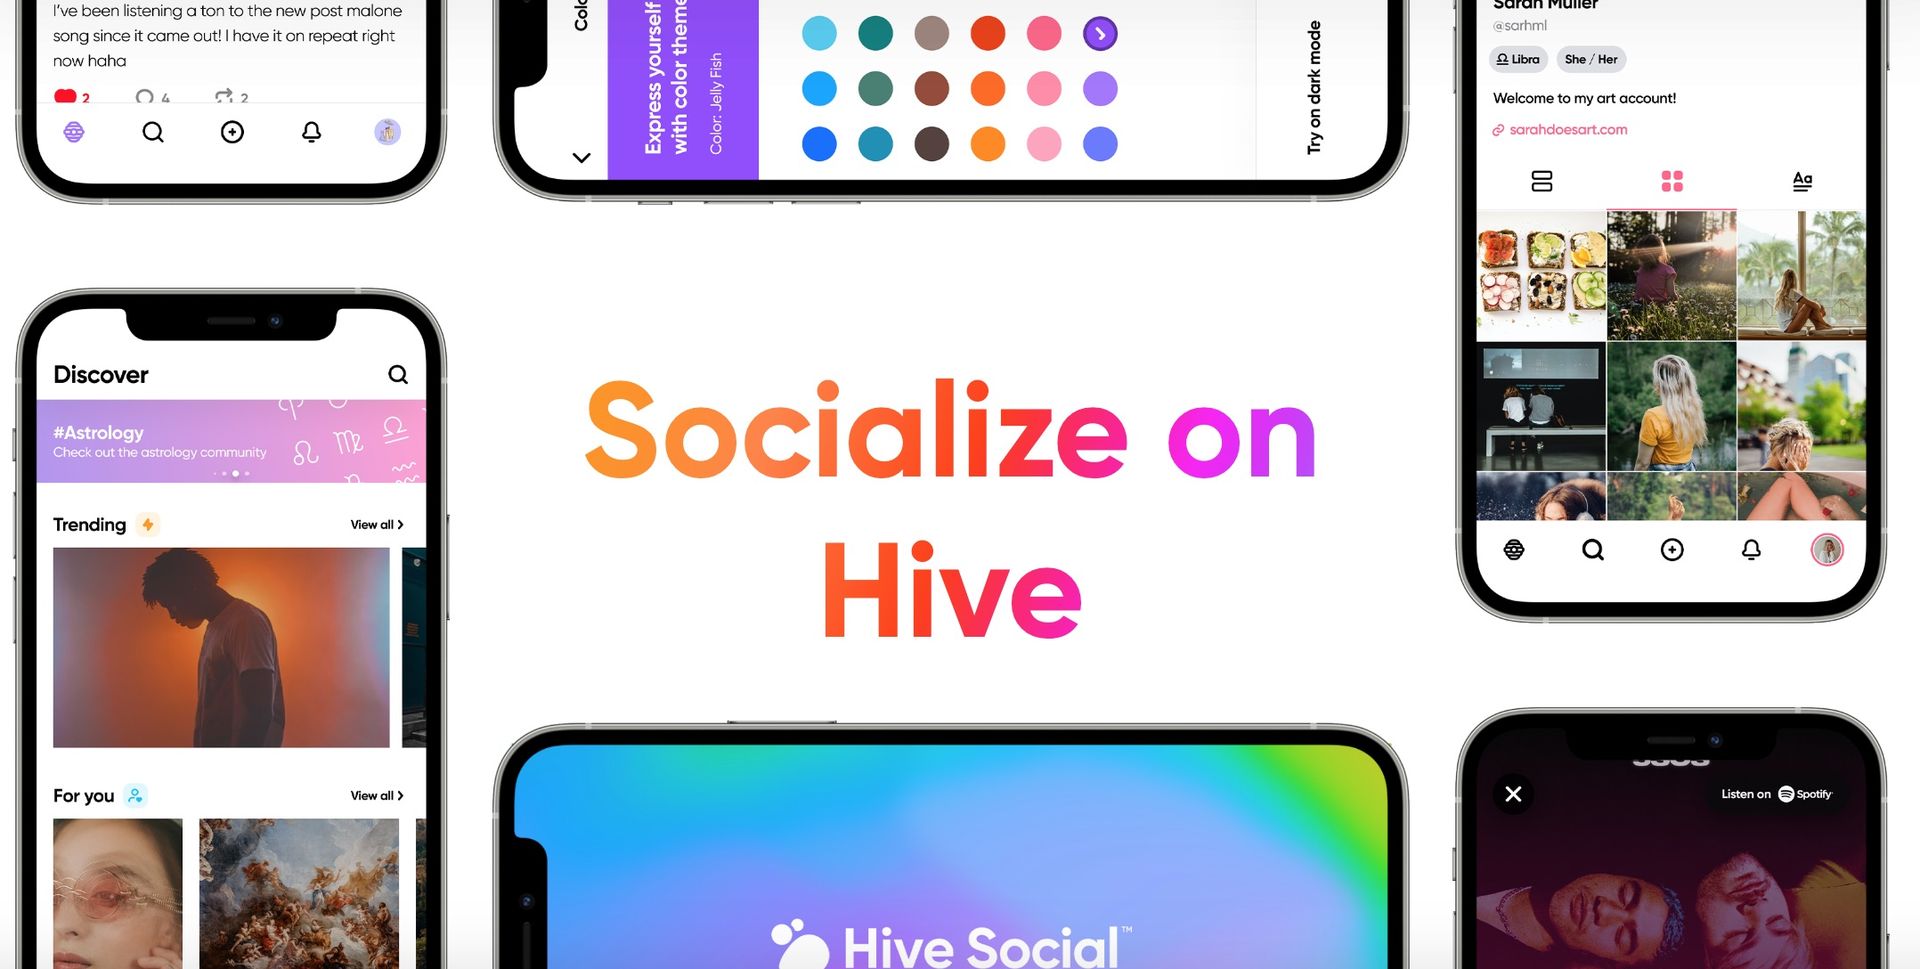 Hive Spotify integration: How to connect Spotify to Hive Social?